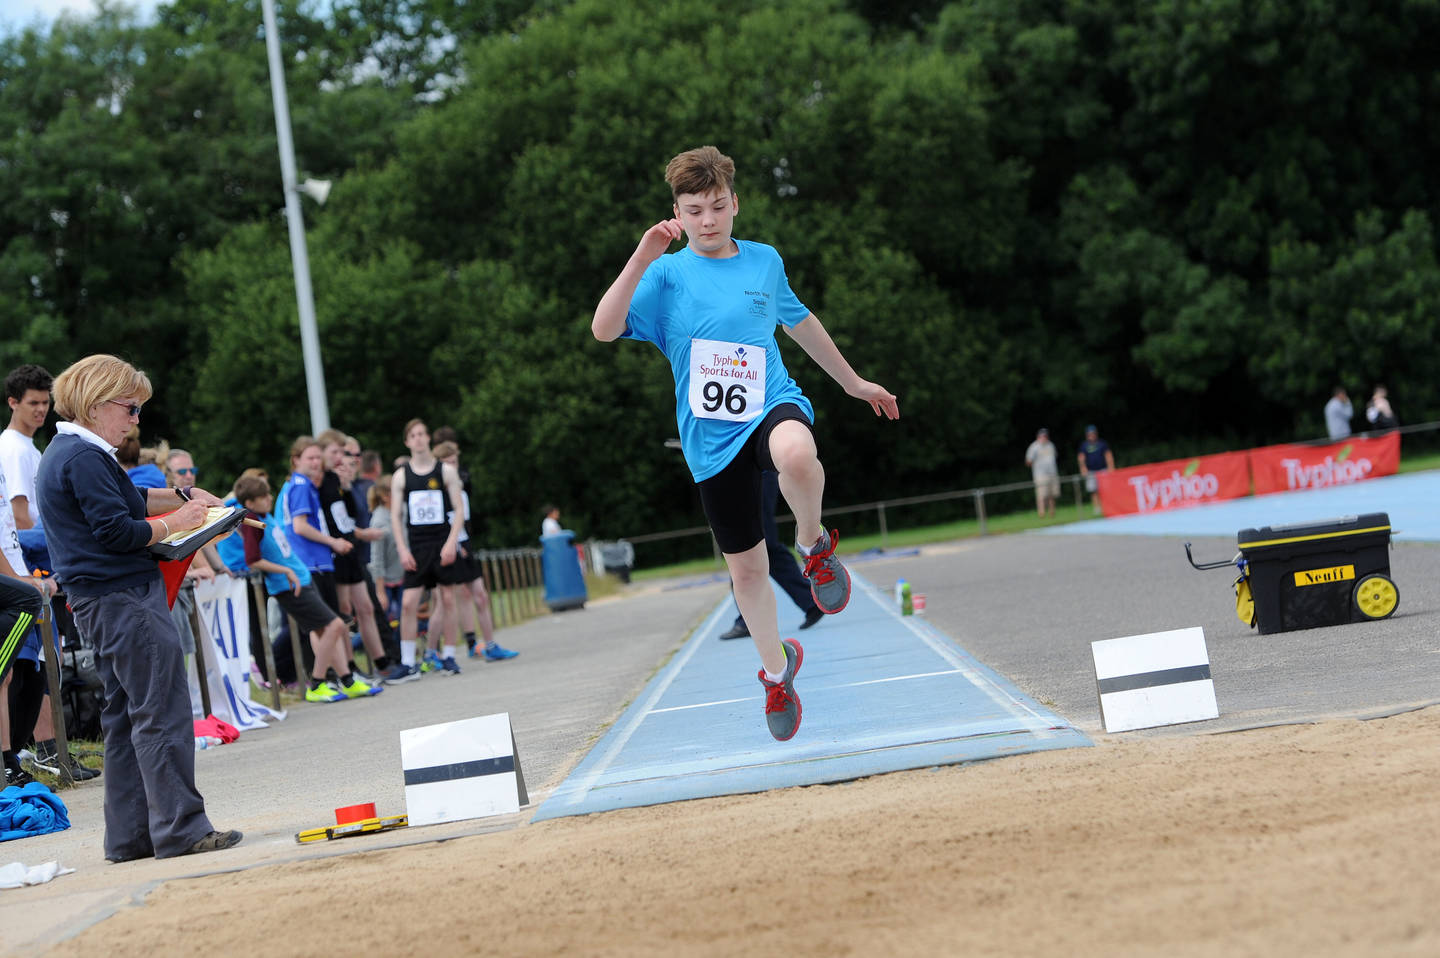 Athlete competing in the long jump at the Typhoo National Championships in 2017. 